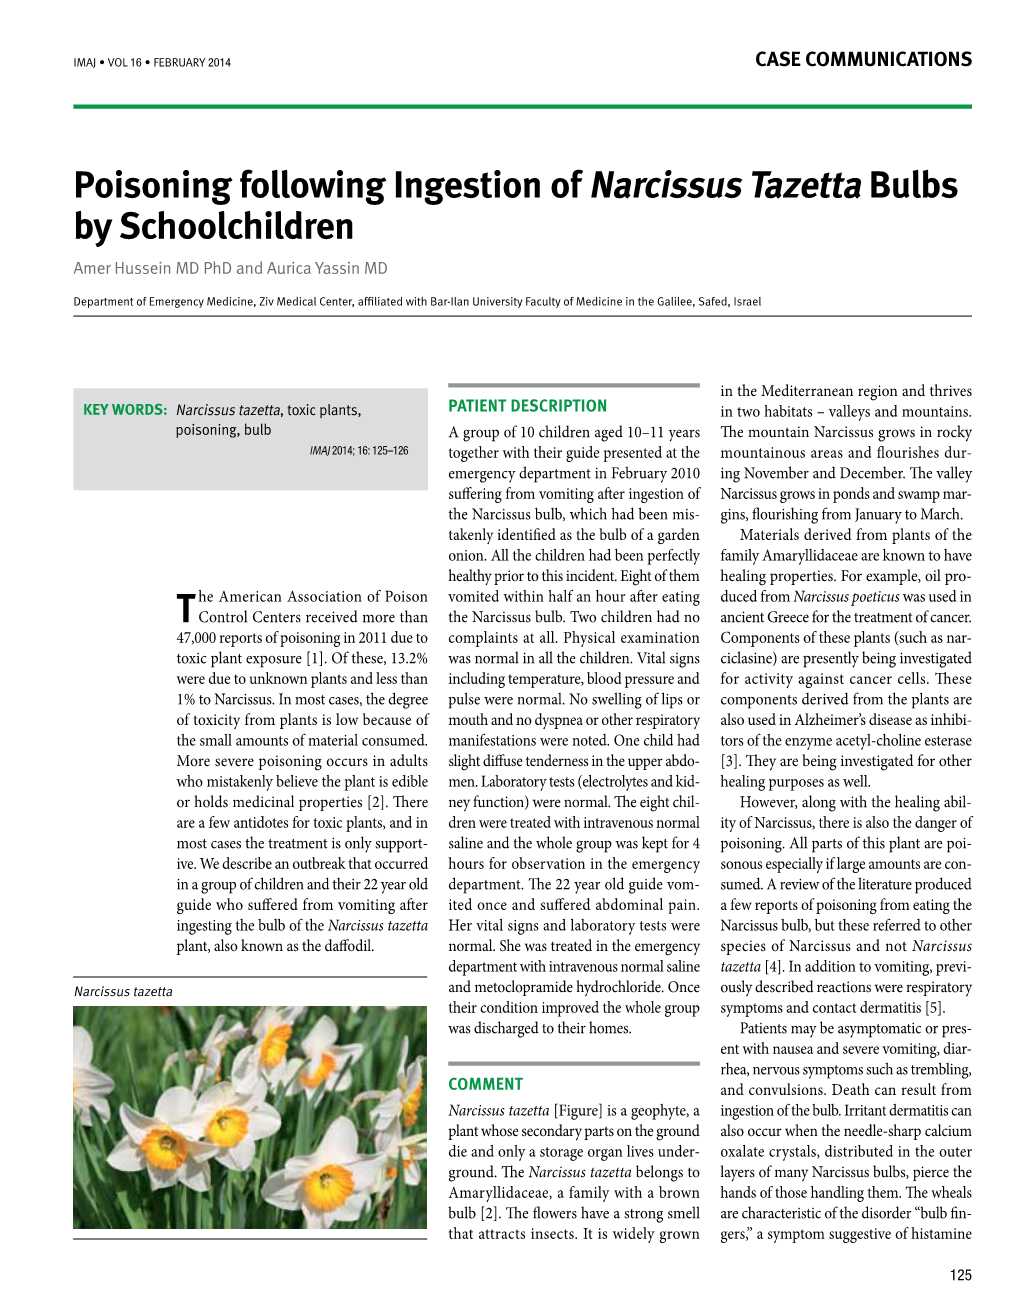 Poisoning Following Ingestion of Narcissus Tazetta Bulbs by Schoolchildren Amer Hussein MD Phd and Aurica Yassin MD